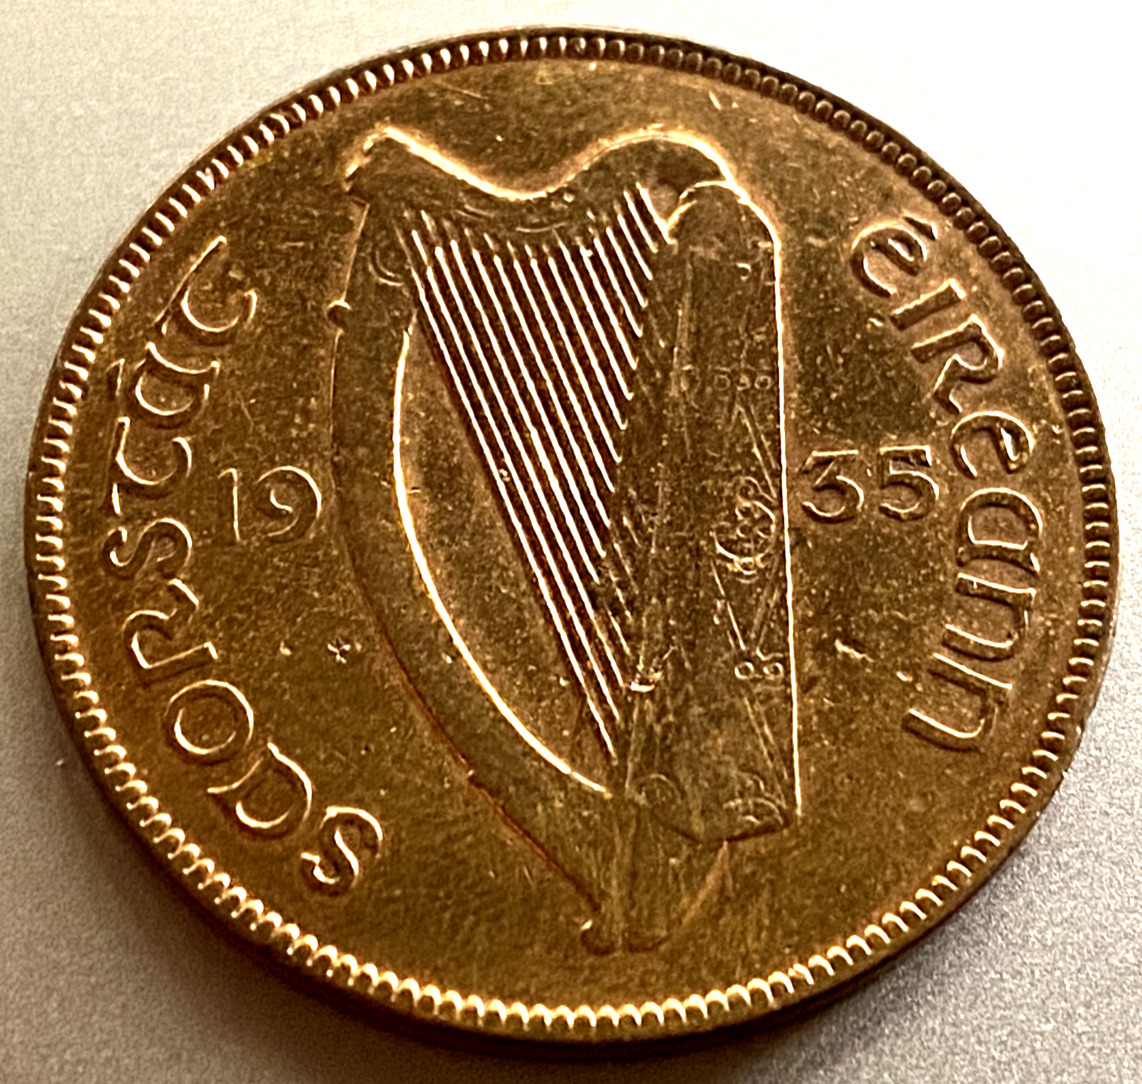 1935 Irish One Penny Coin Old Ireland 1d Harp And Hen. Au Condition.